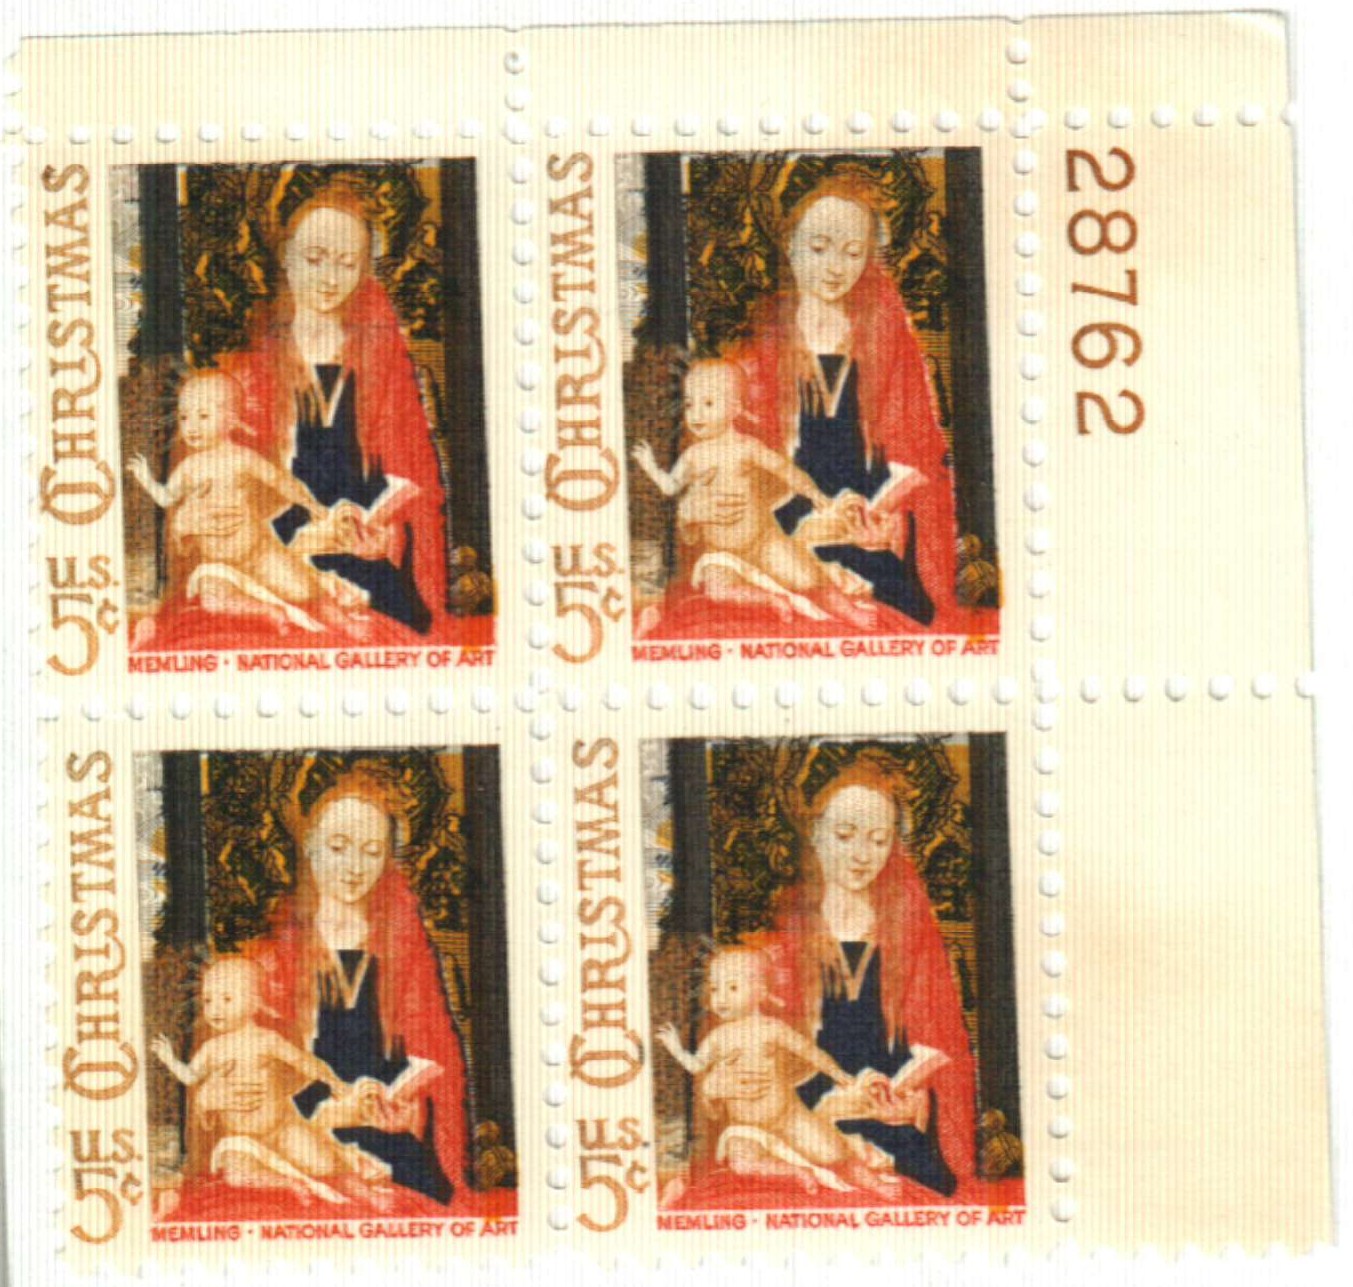 US 1966 Postal Stamps, Madonna and Child, S# 1321, PB of 4 5 Cent Stamps